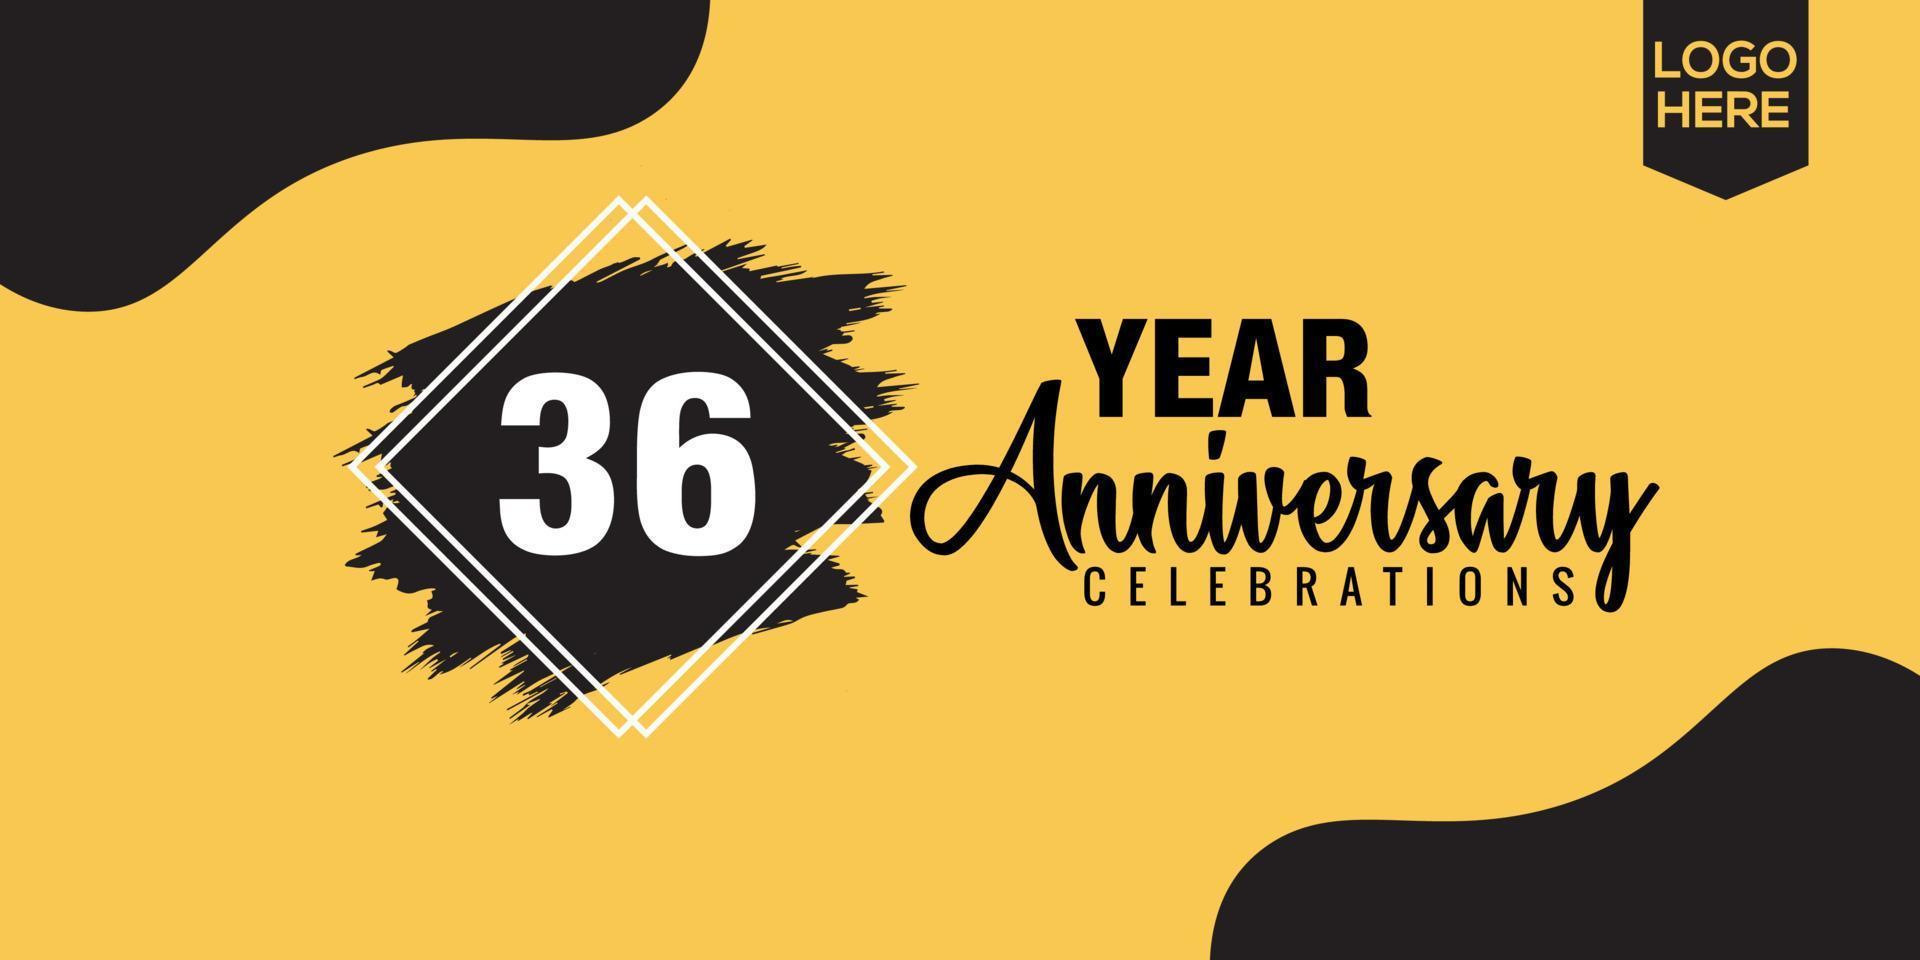 36th years anniversary celebration logo design with black brush and yellow color with black abstract vector illustration